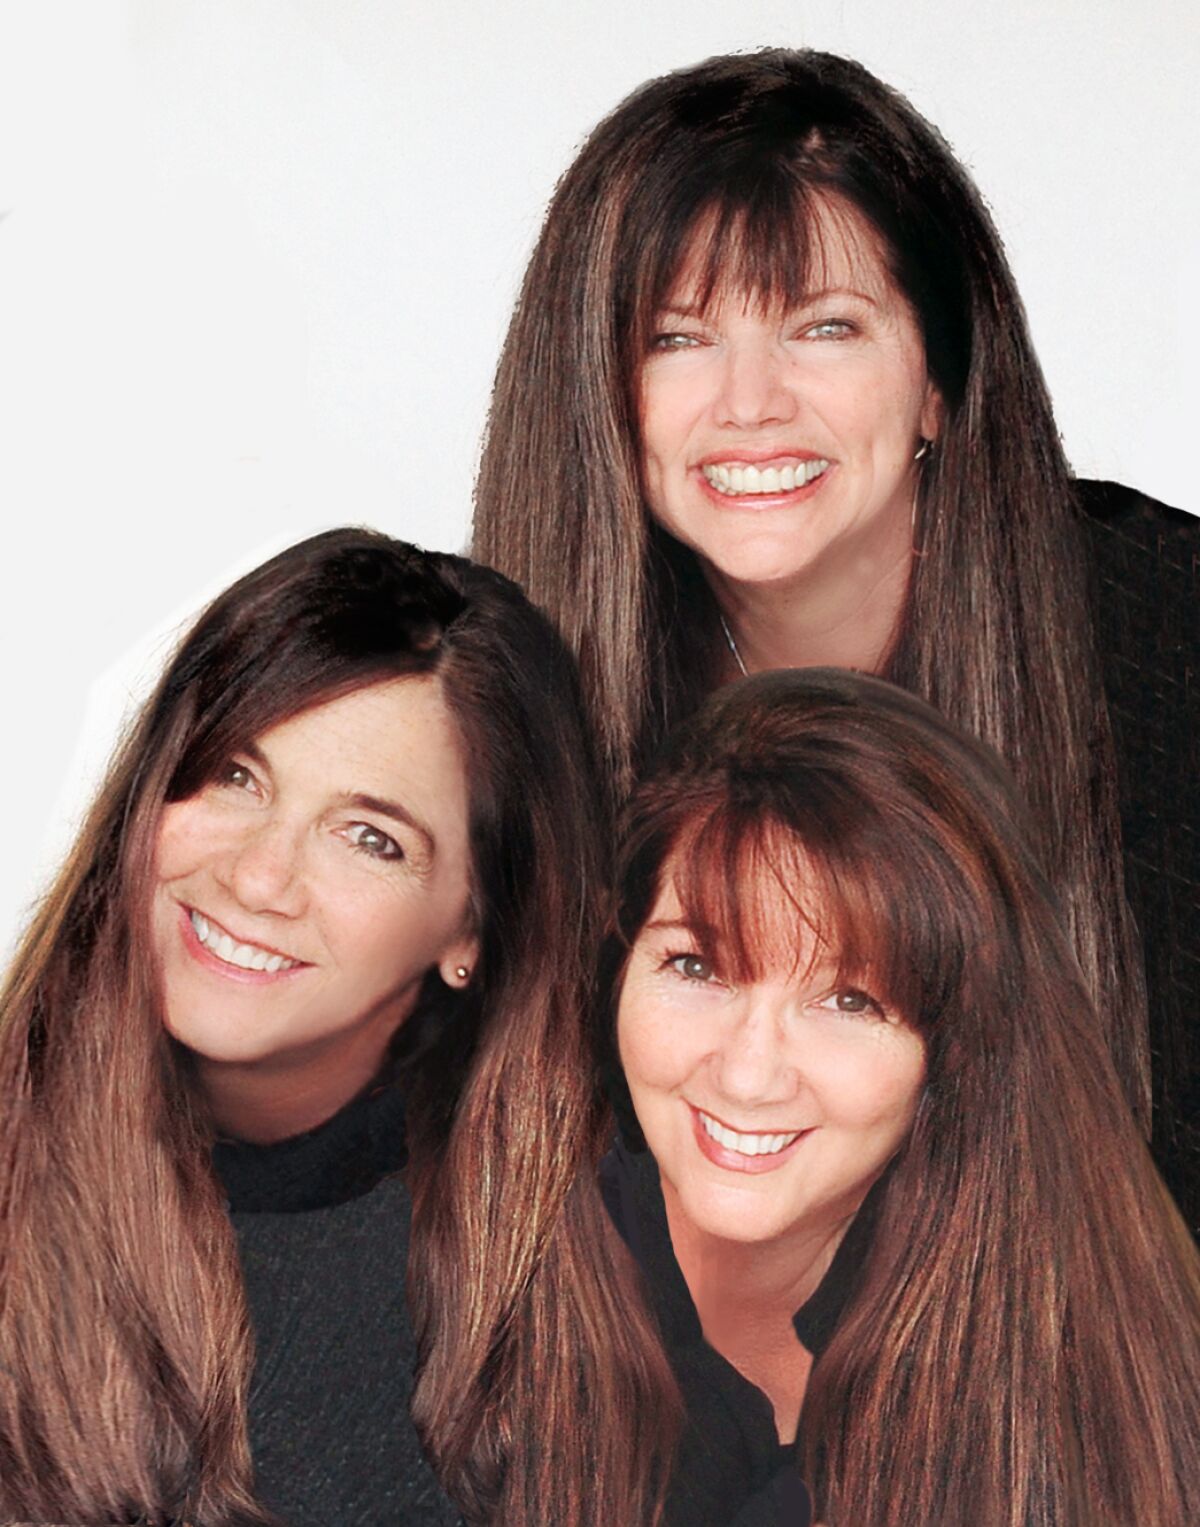 Mabel's was founded by Solana Beach sisters Lisa Ketcham, Leah Cassidy and Colleen Morgans.